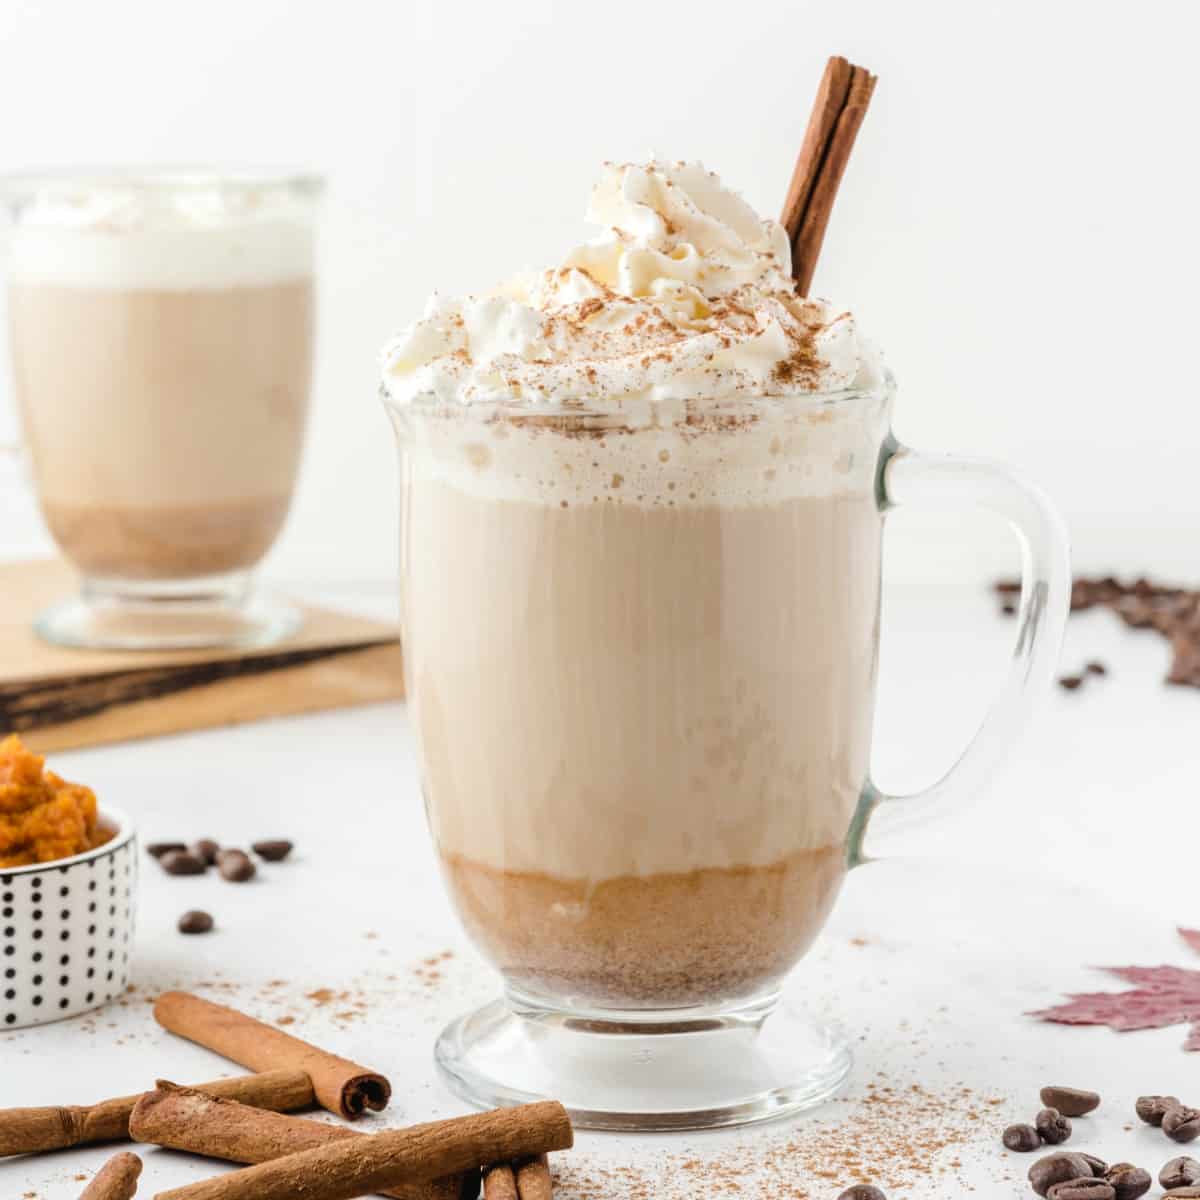 Mr Coffee Cafe Latte Brewer #Review (Plus Pumpkin Spice Starbucks Copycat  Recipe and others) - Living Chic Mom